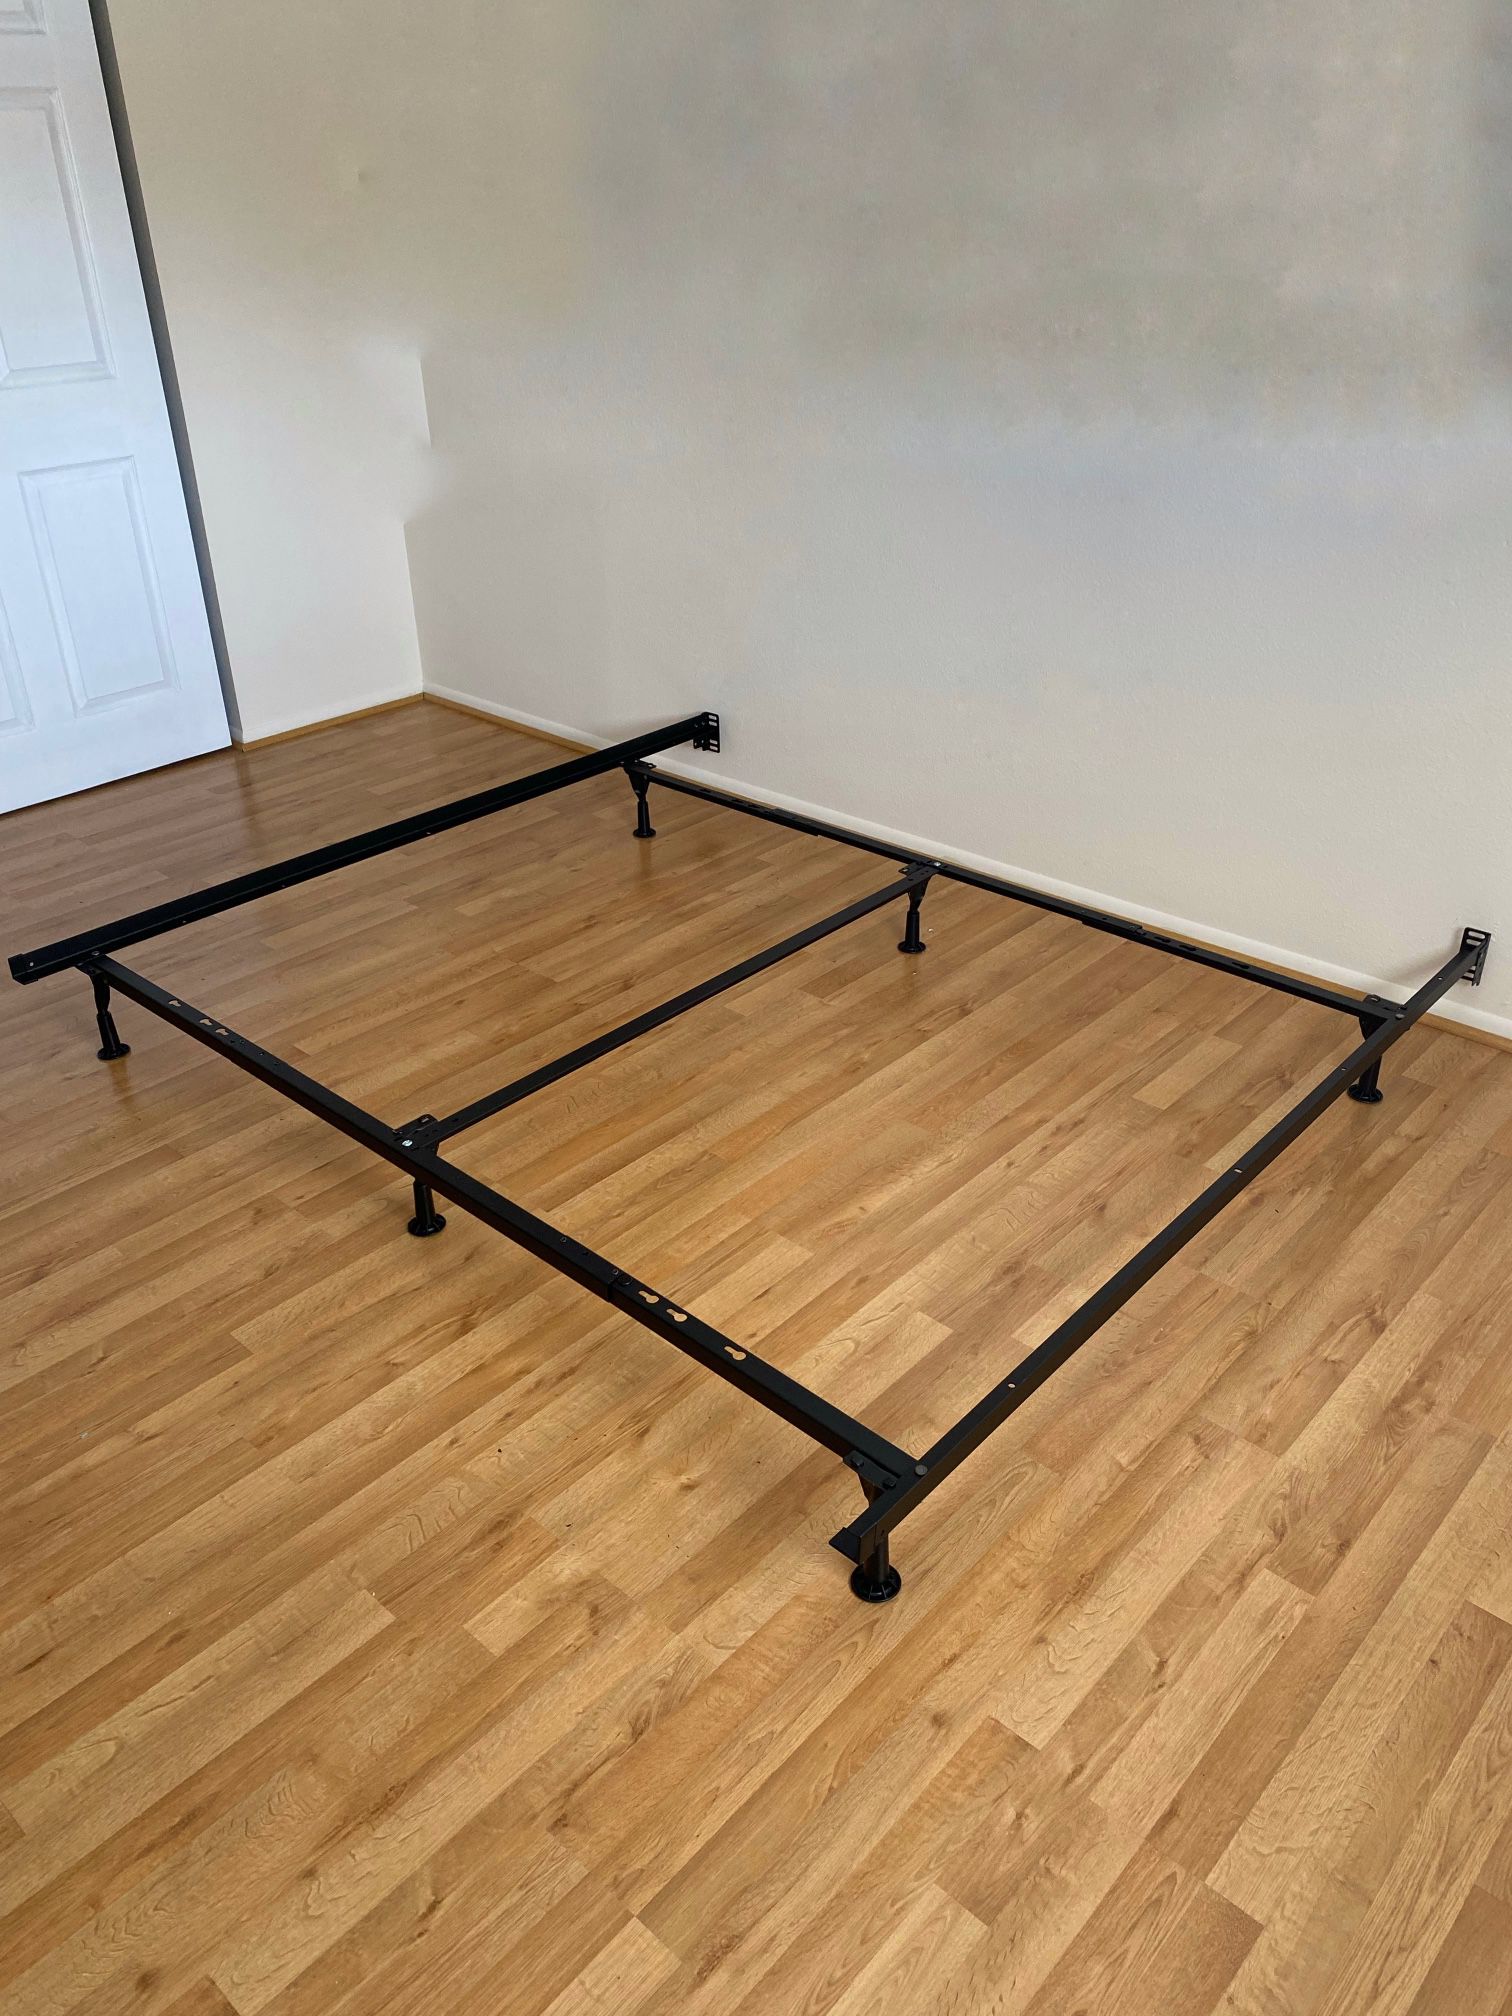 Metal Bed Frame Adjustable To Queen/King/Cal King Size Holds Up To 2000 lb. Distributed Weight 70” L. Delivery Available